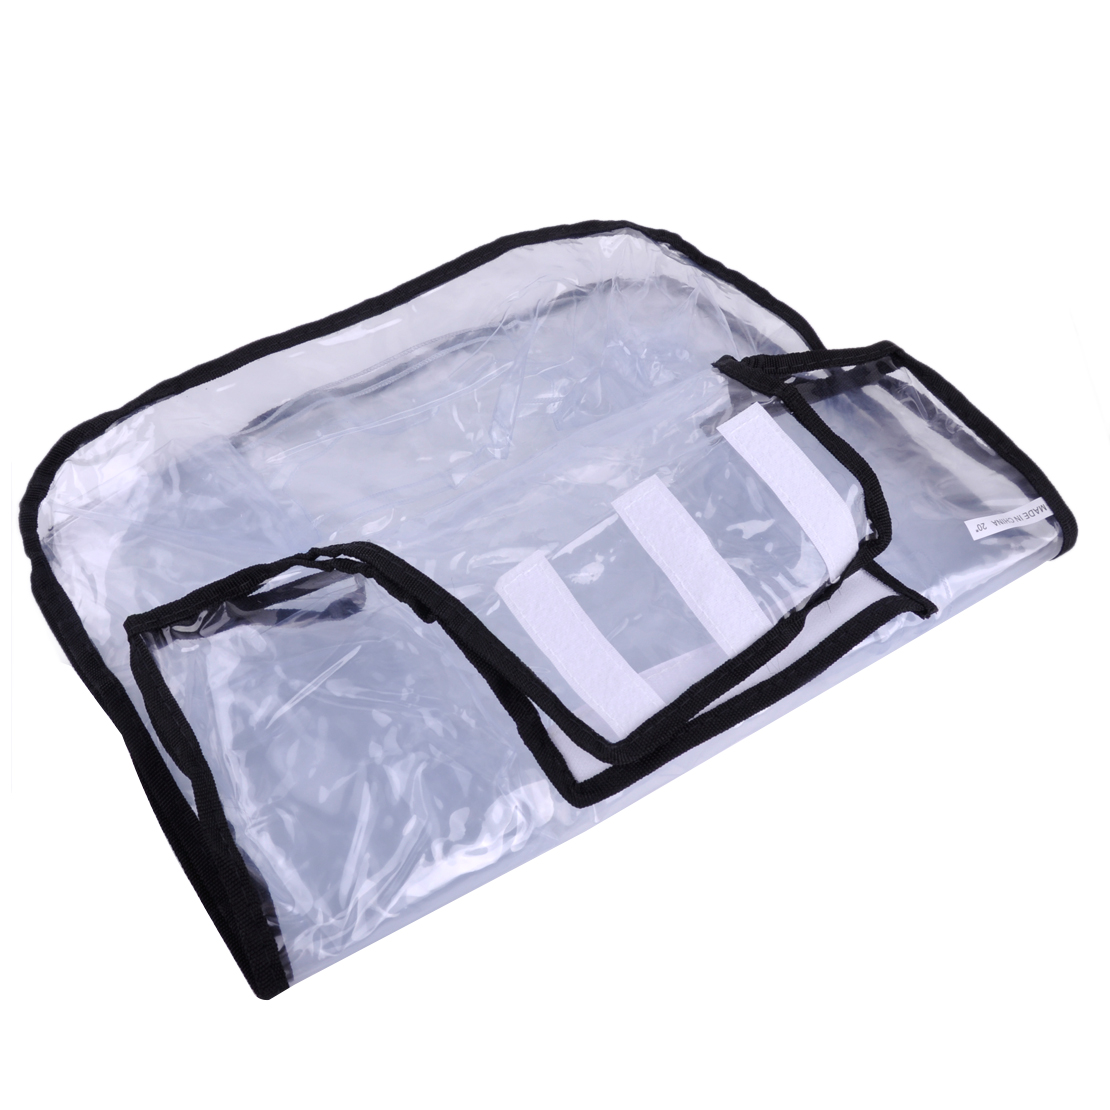 Clear PVC Waterproof Travel Luggage Protector Suitcase Case Cover 20 22 ...